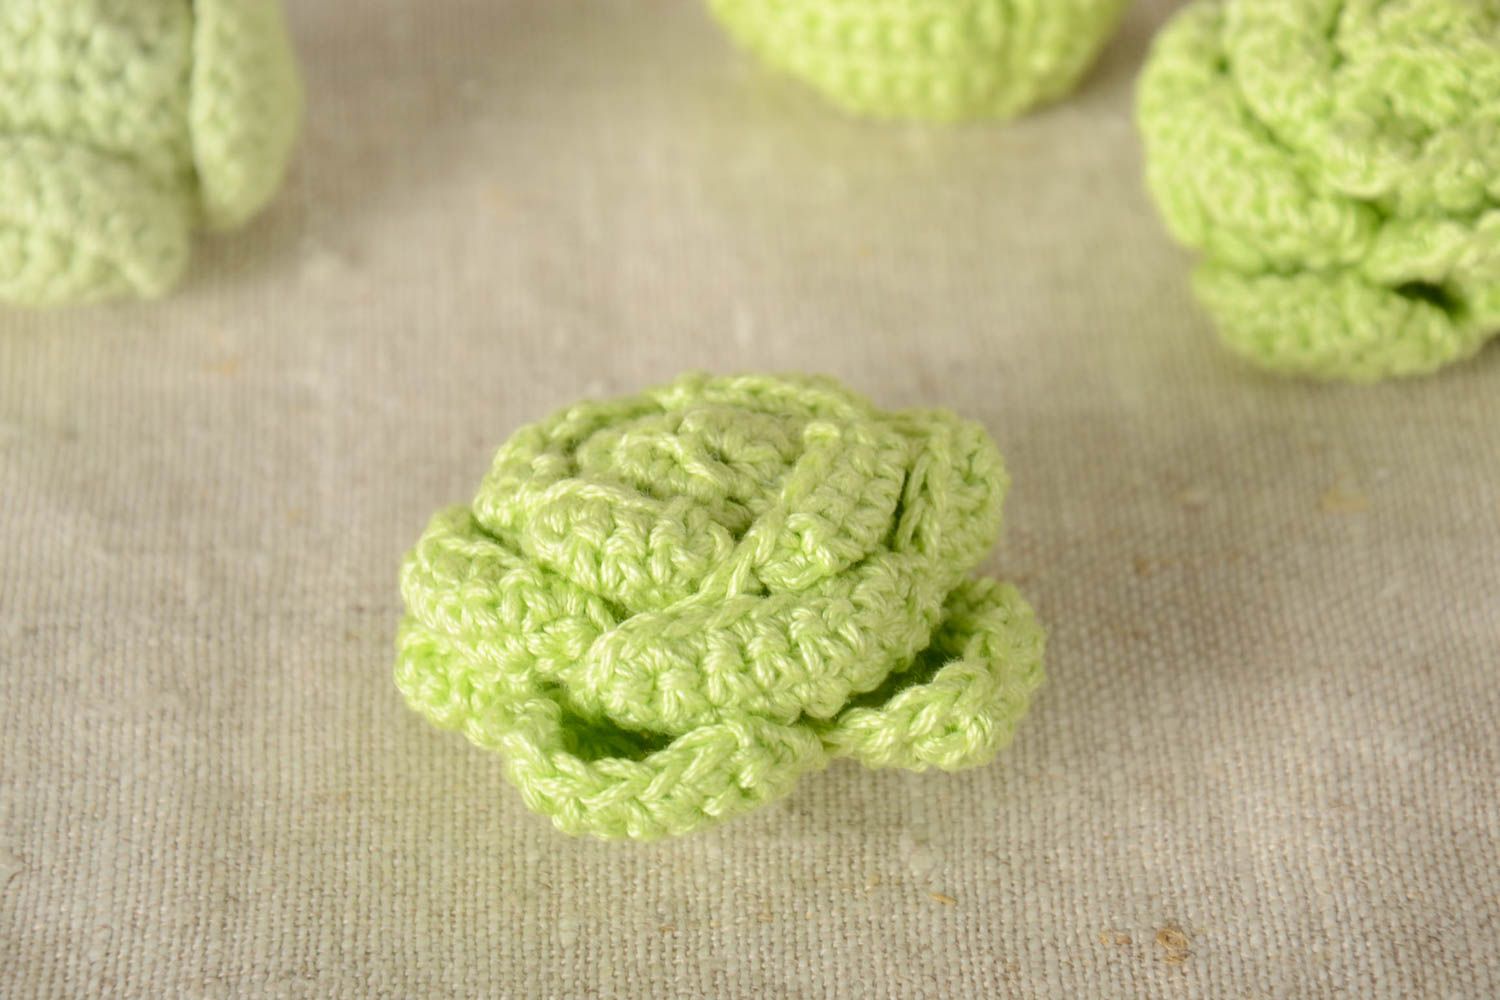 Crocheted textile cabbage handmade stylish vegetable kids cute soft toy  photo 1